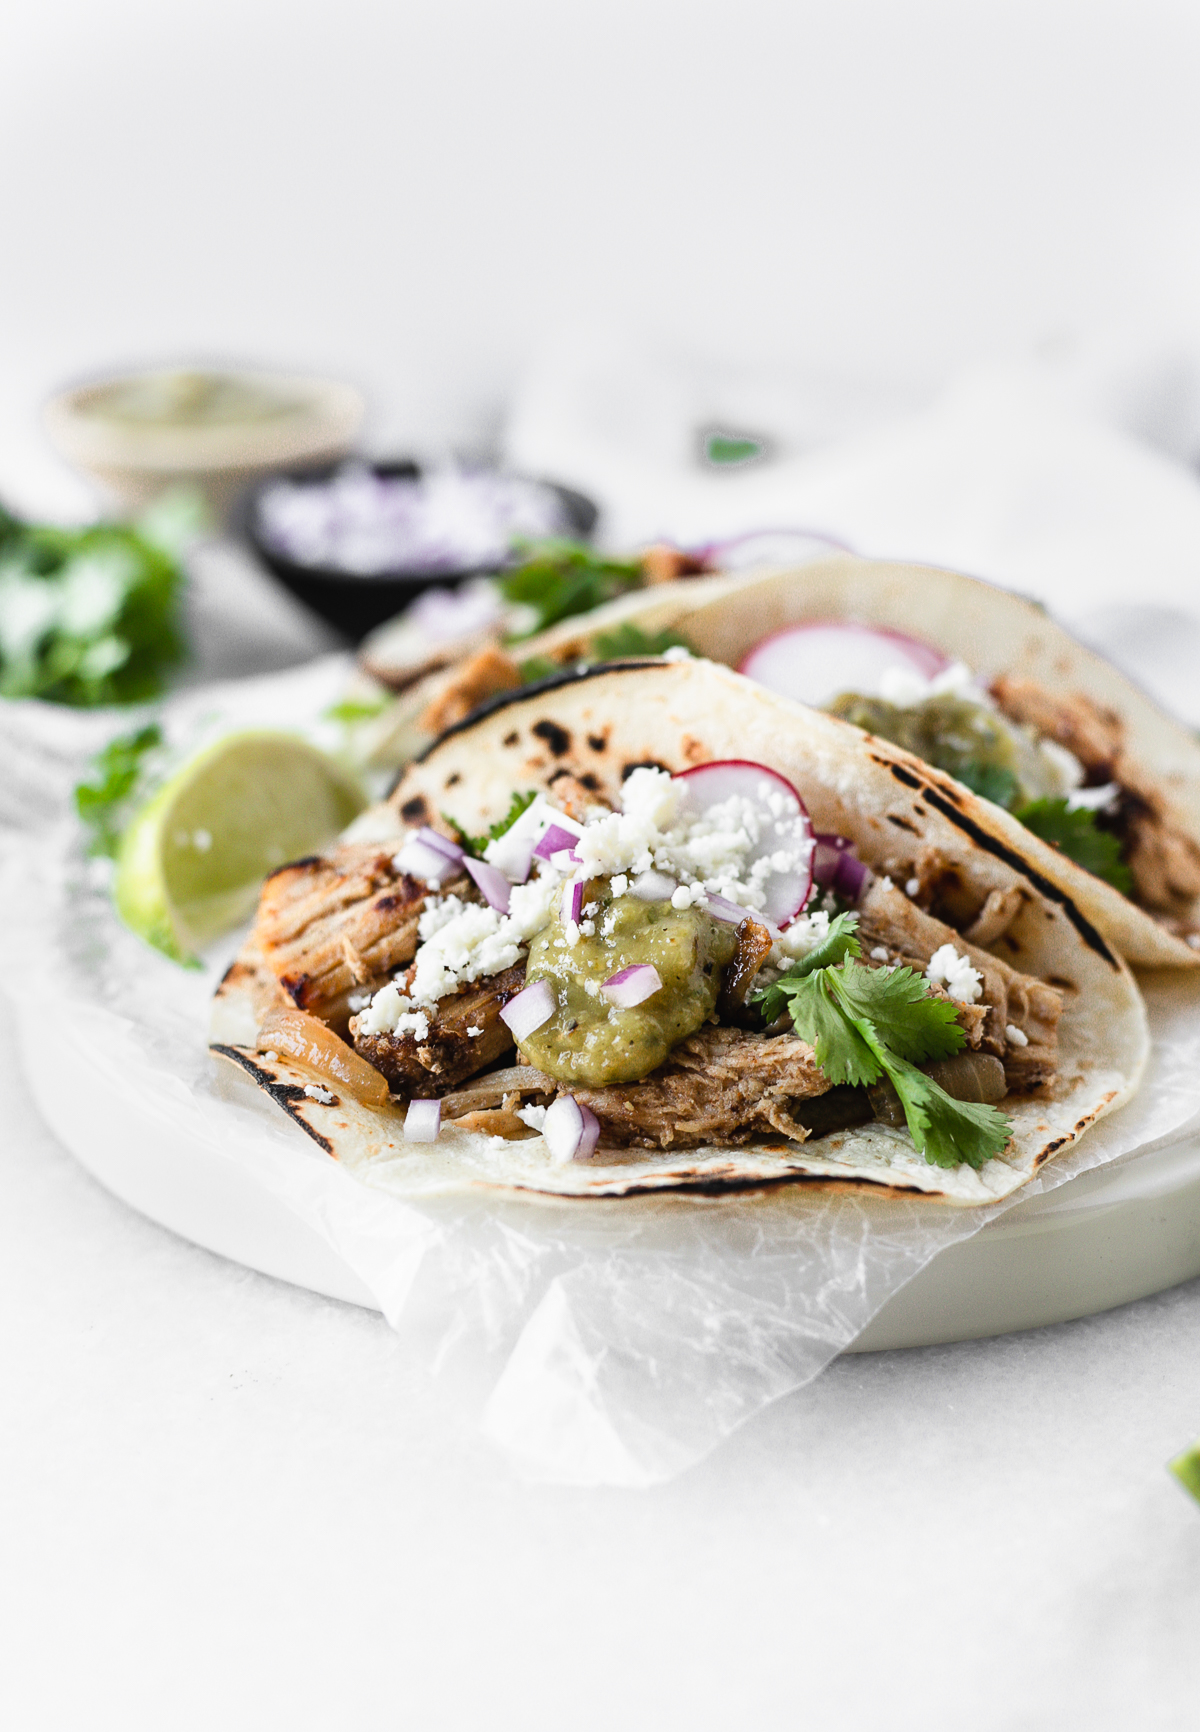 carnitas taco with red onion, cotija, cilntro, radish and green salsa on a plate with a lime wedge.